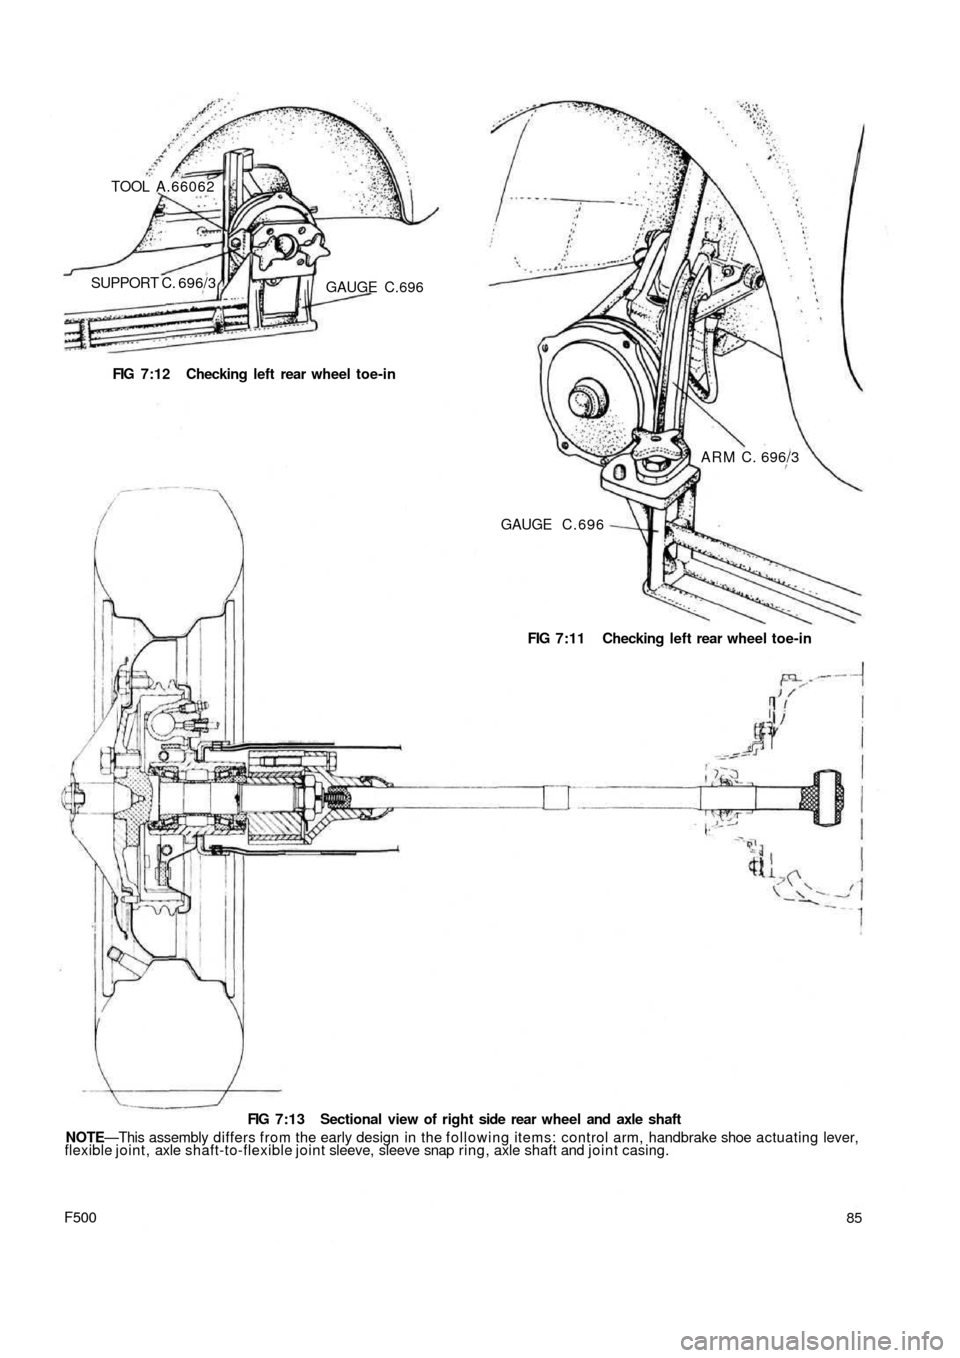 FIAT 500 1957 1.G Manual PDF TOOL A.66062
SUPPORT C. 696/3GAUGE C.696
FIG 7:12 Checking left rear wheel toe-in
ARM C. 696/3
GAUGE C . 6 9 6
FIG 7:11 Checking left rear wheel toe-in
F500
FIG 7:13 Sectional view of right side rear 